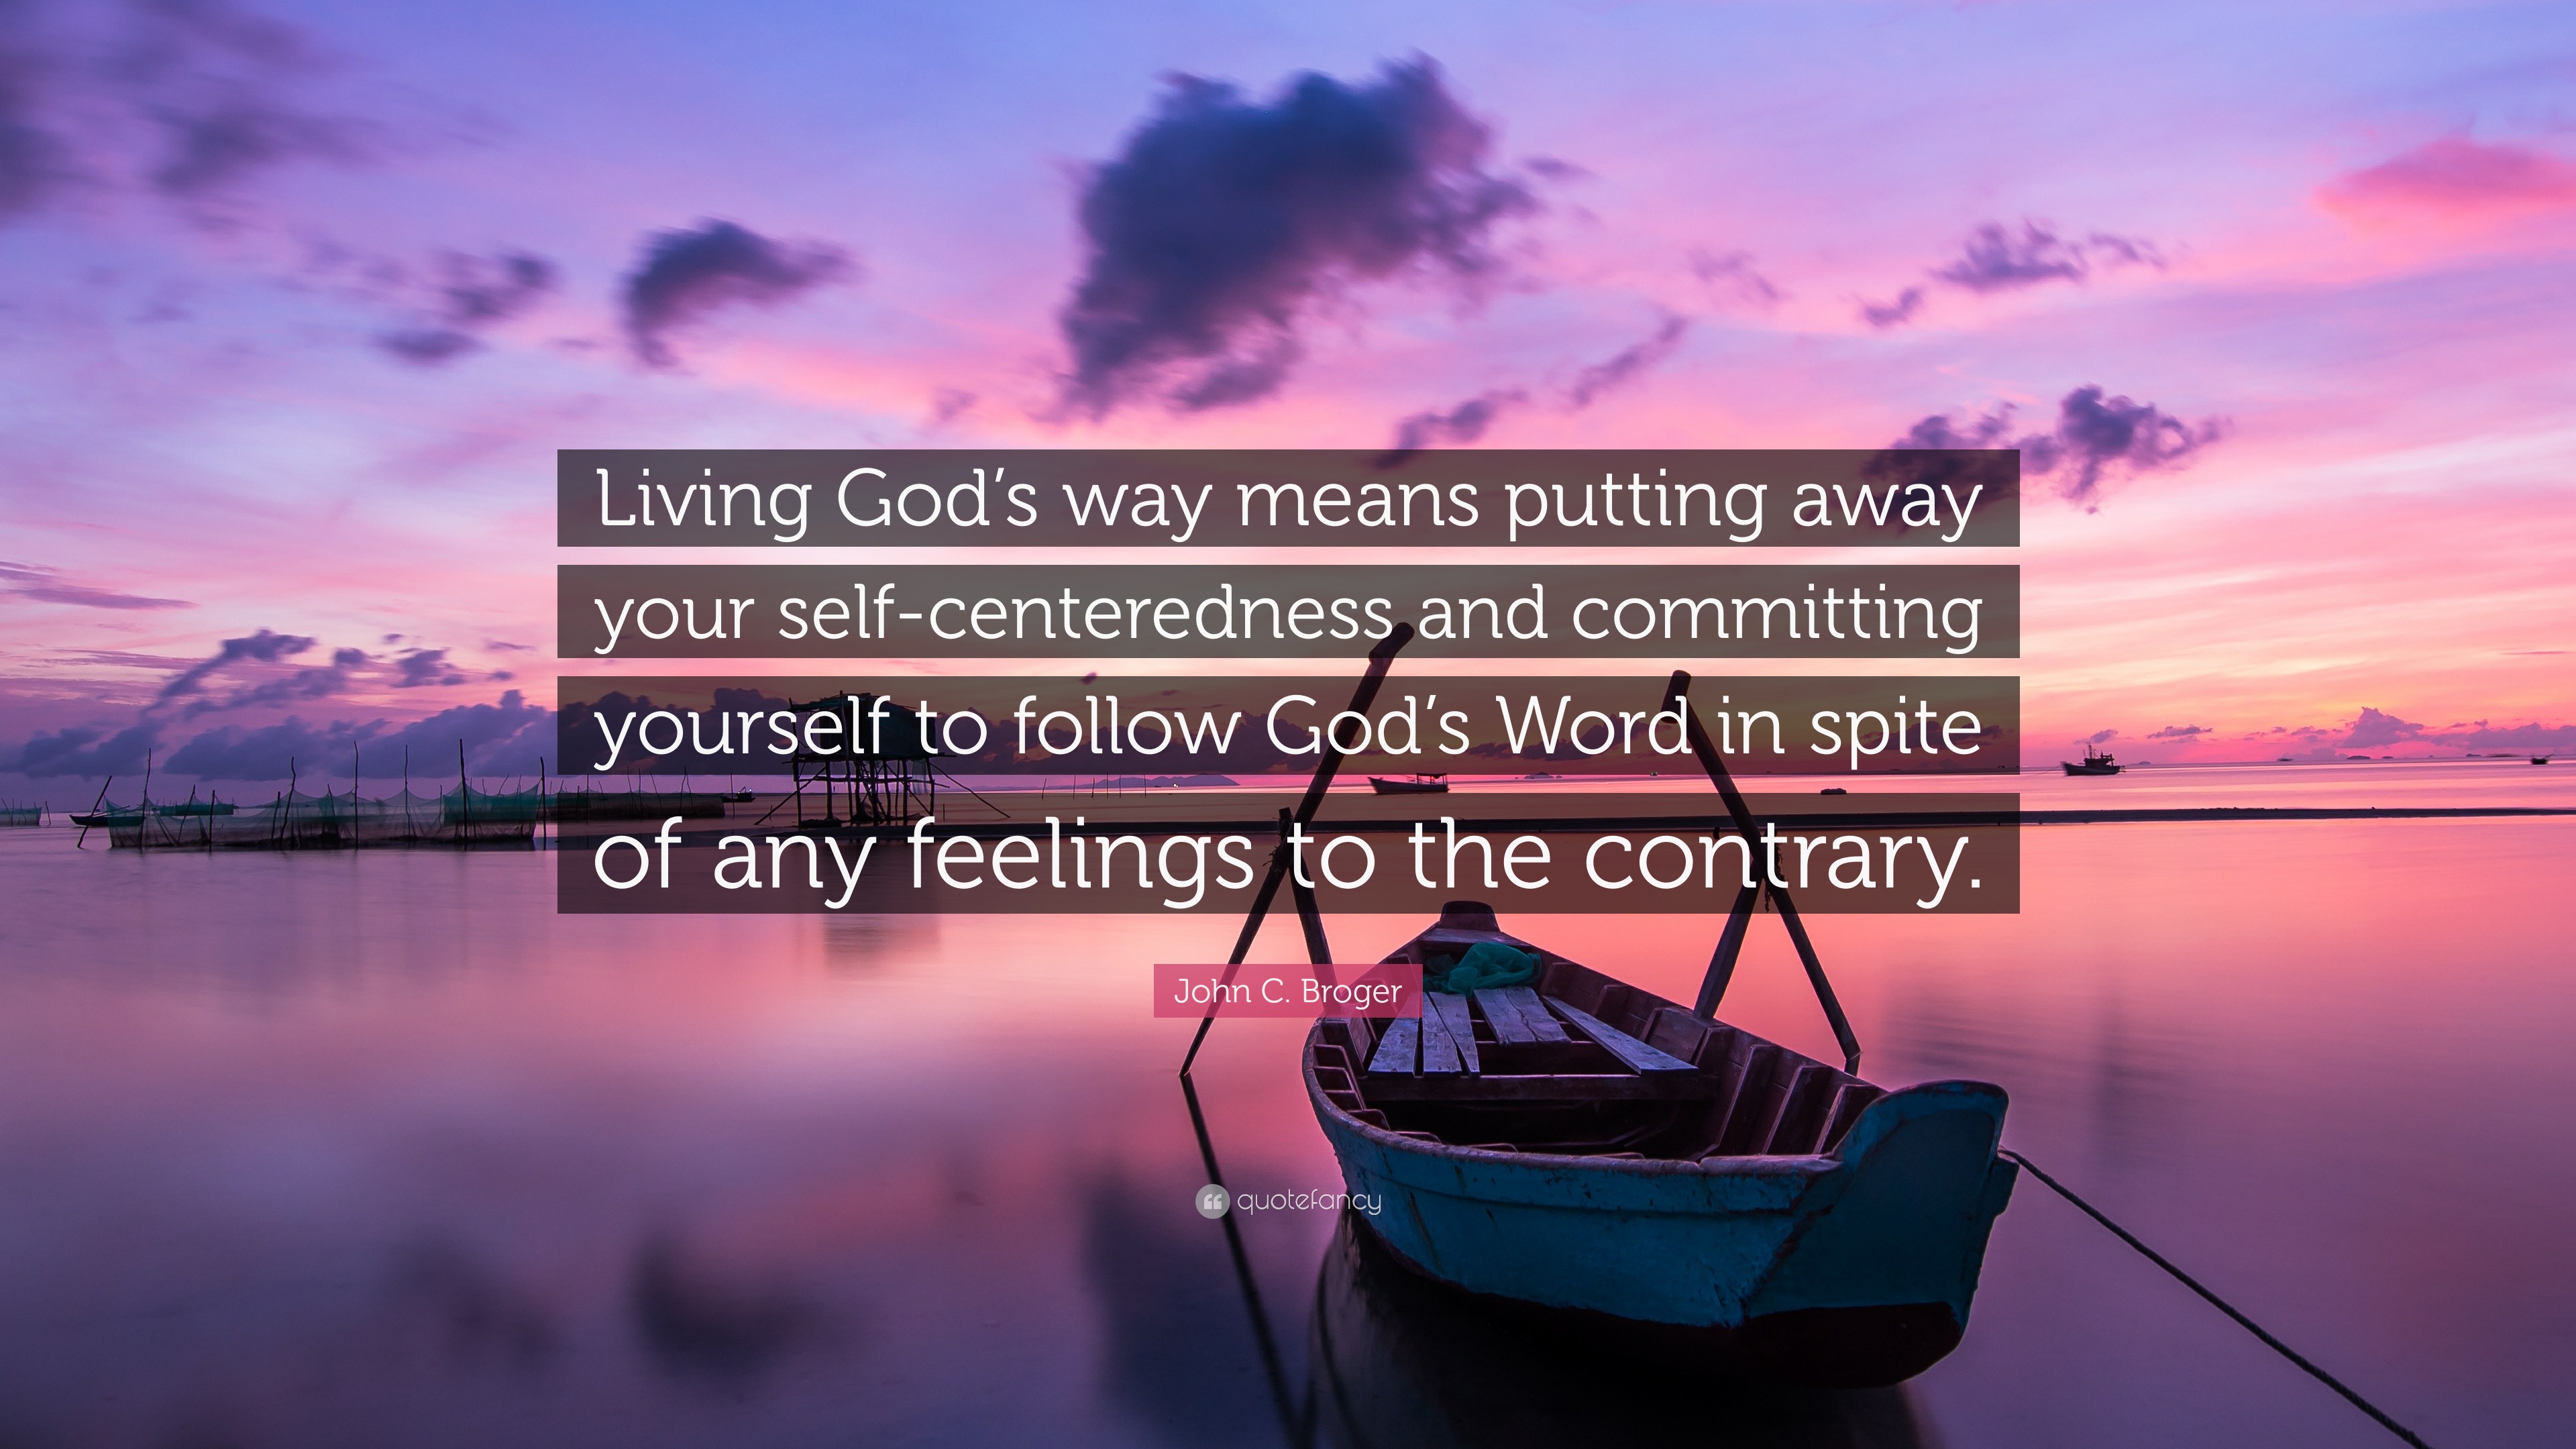 John C. Broger Quote: “Living God’s way means putting away your self